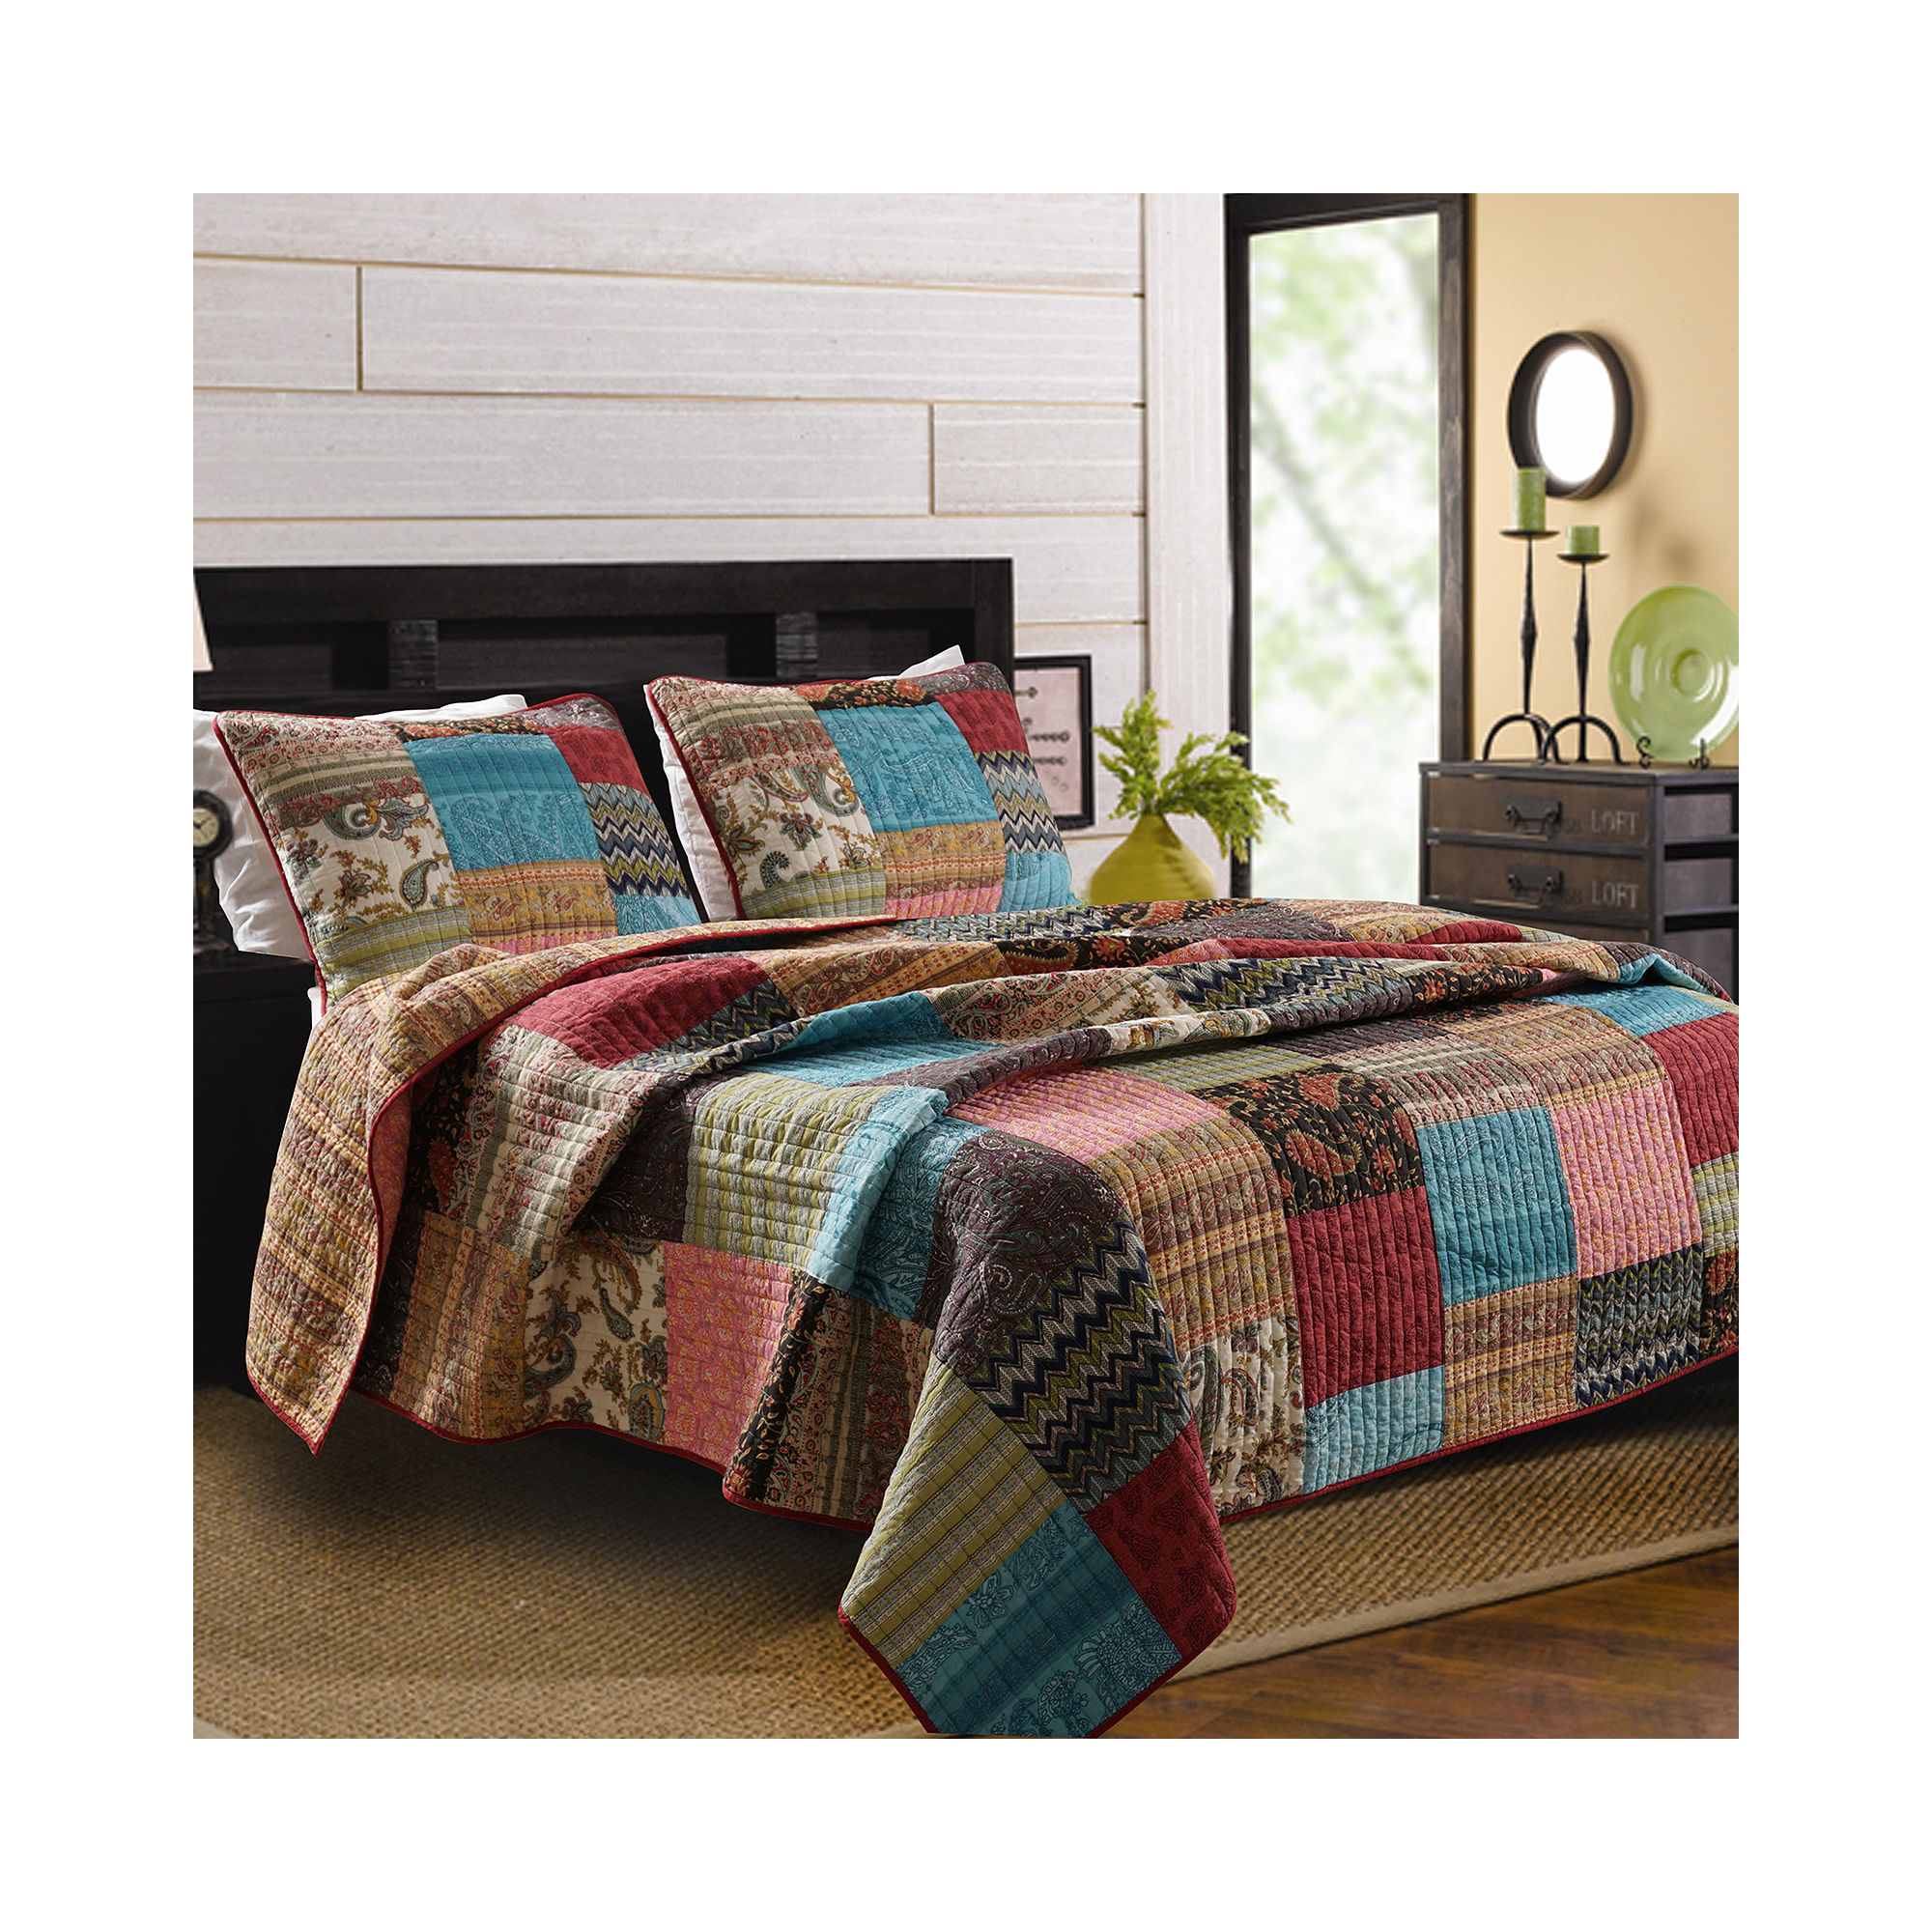 DEALS Greenland Home Fashions New Bohemian Patchwork Quilt Set LIMITED